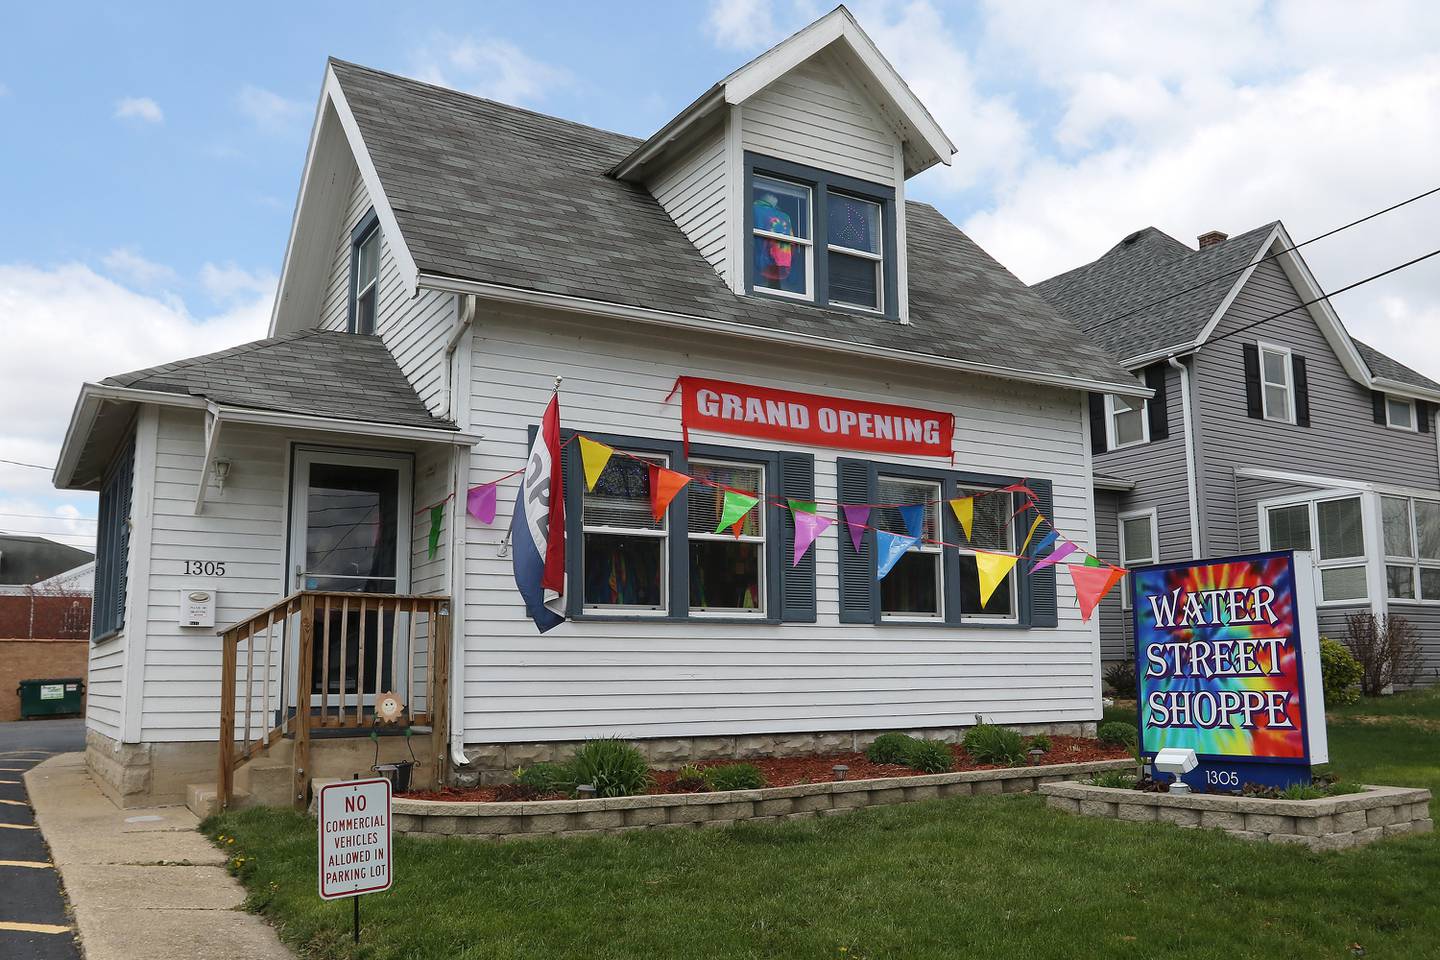 Water Street Shoppe, located on Court Street in McHenry, is still decorated from their grand reopening the prior week on Thursday, April 15, 2021.